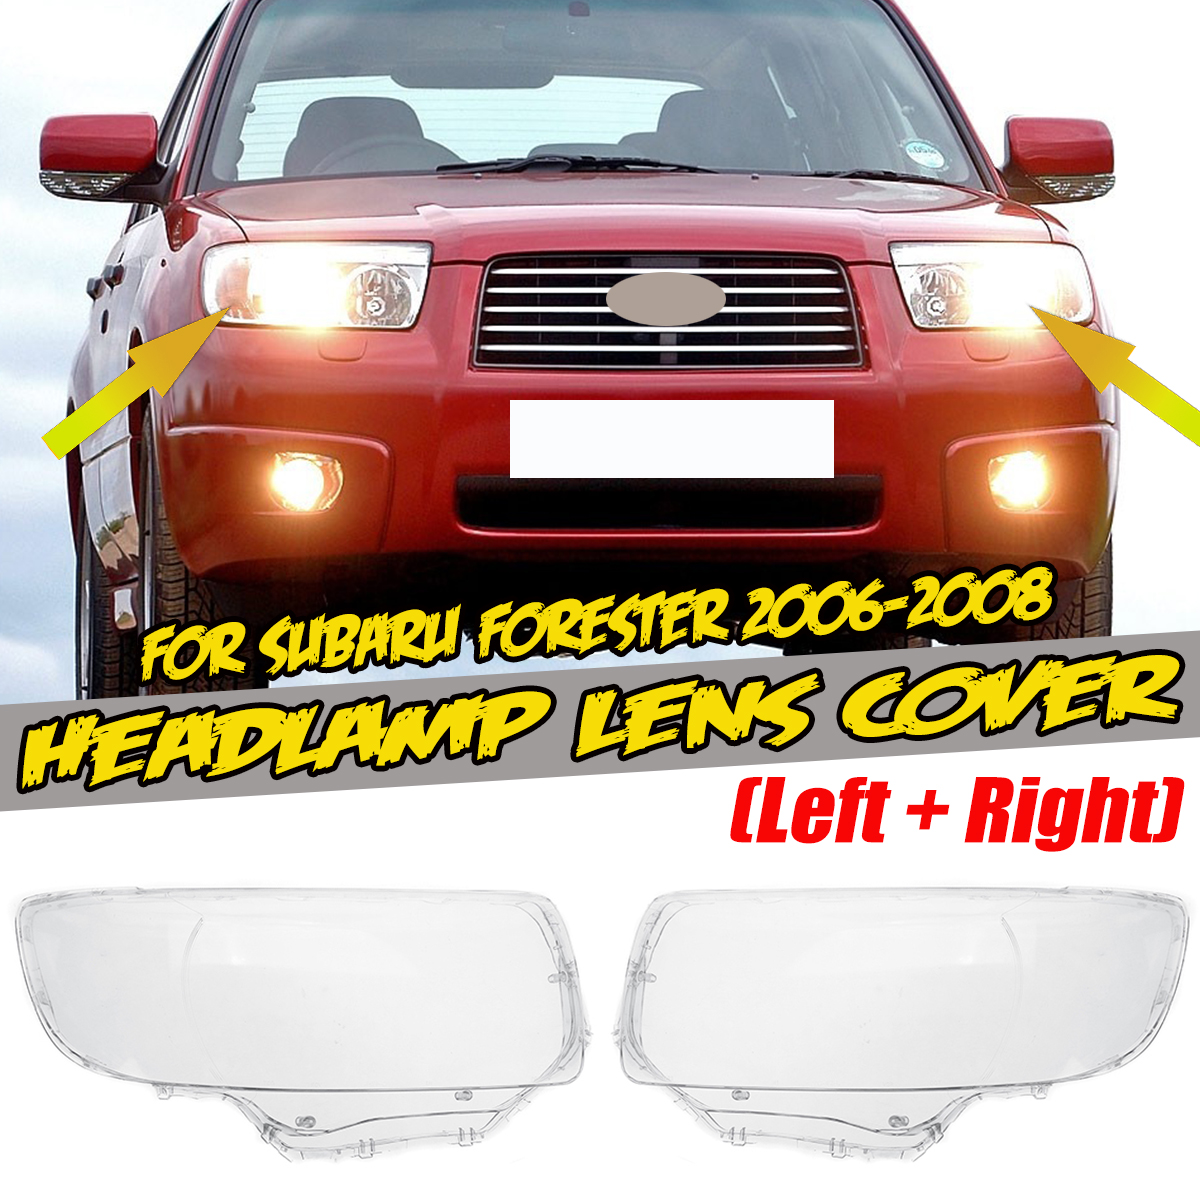 Find For Subaru Forester 2006-2008 Headlight Headlamp Lens Cover (Left+Right) for Sale on Gipsybee.com with cryptocurrencies